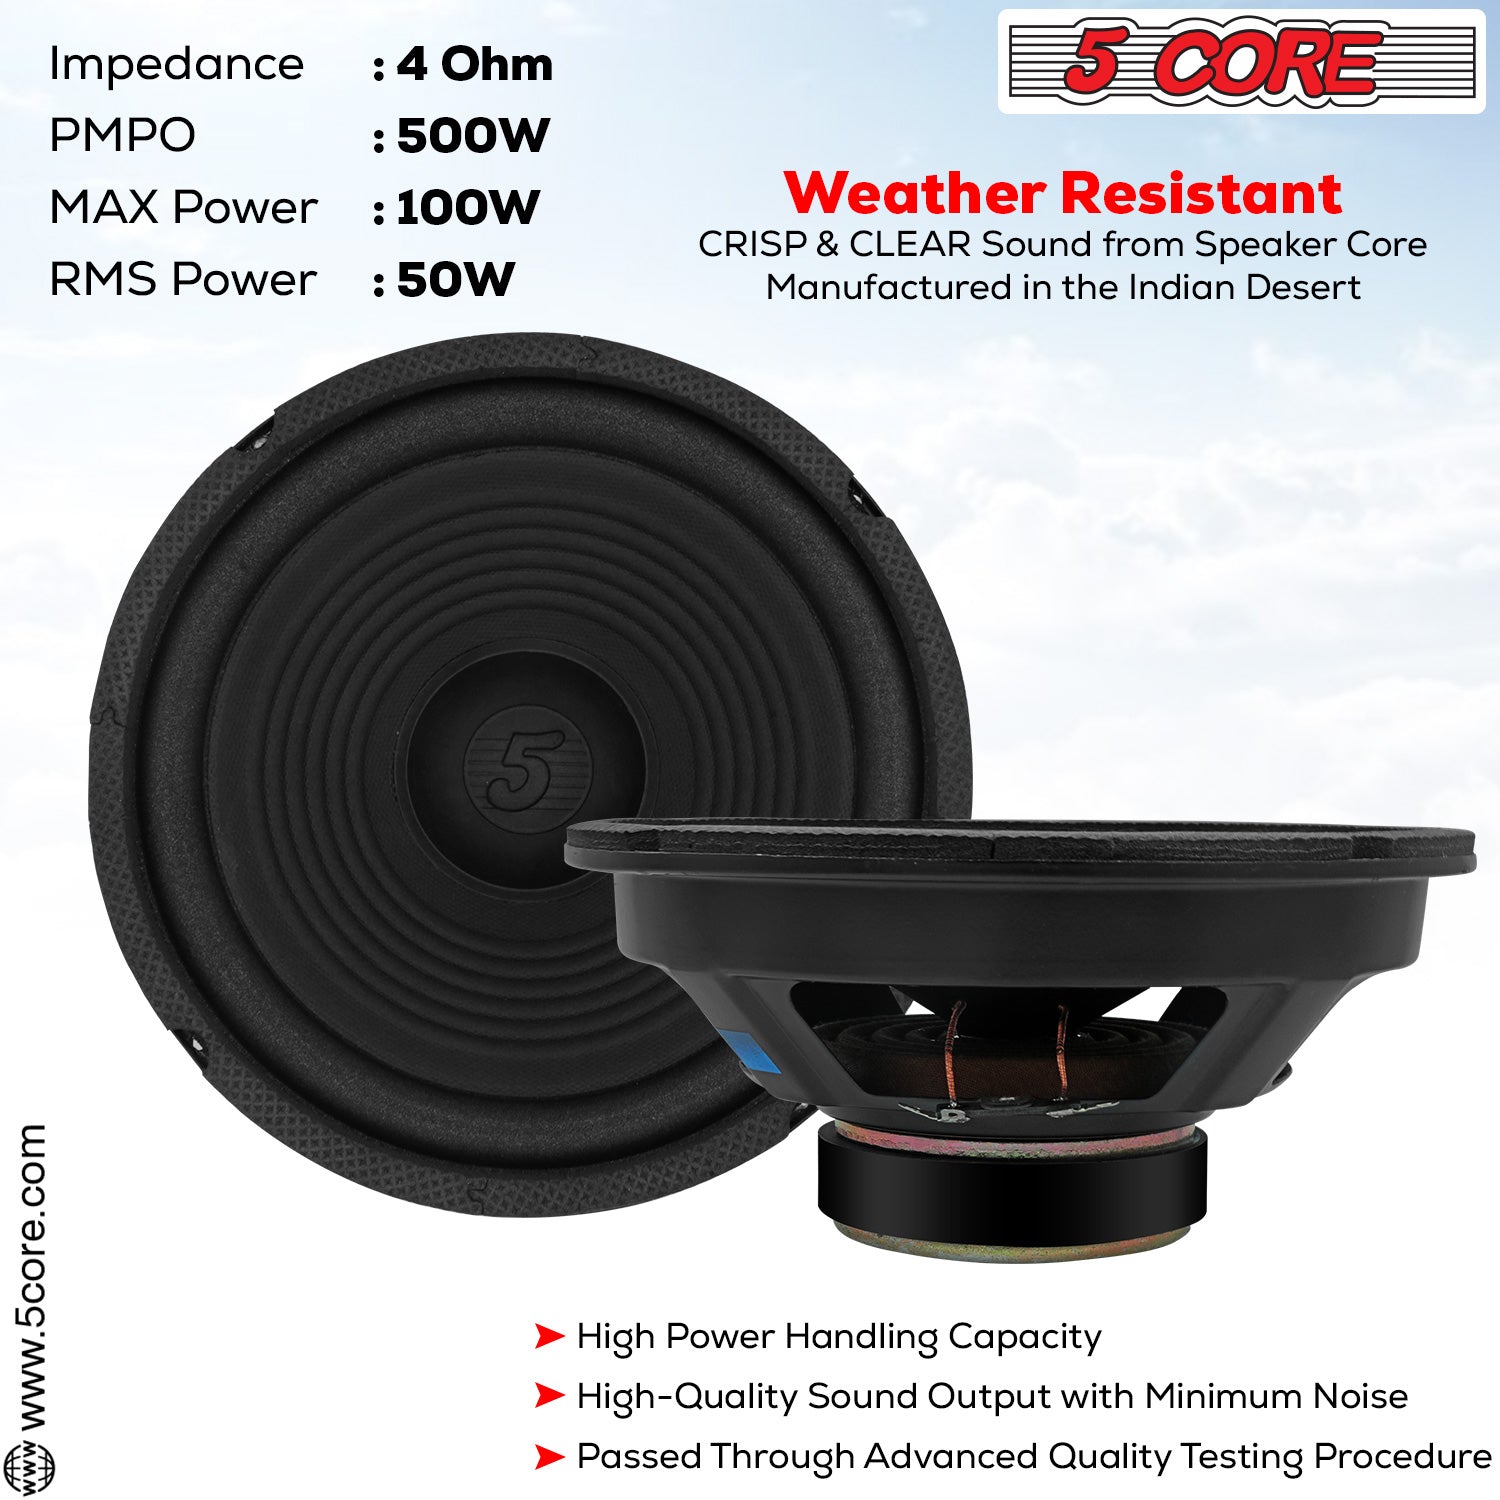 5Core 8 Inch Subwoofer Car Audio 500W PMPO 4 Ohm Bass Sub Woofer Replacement Speaker w 0.81" Voice Coil